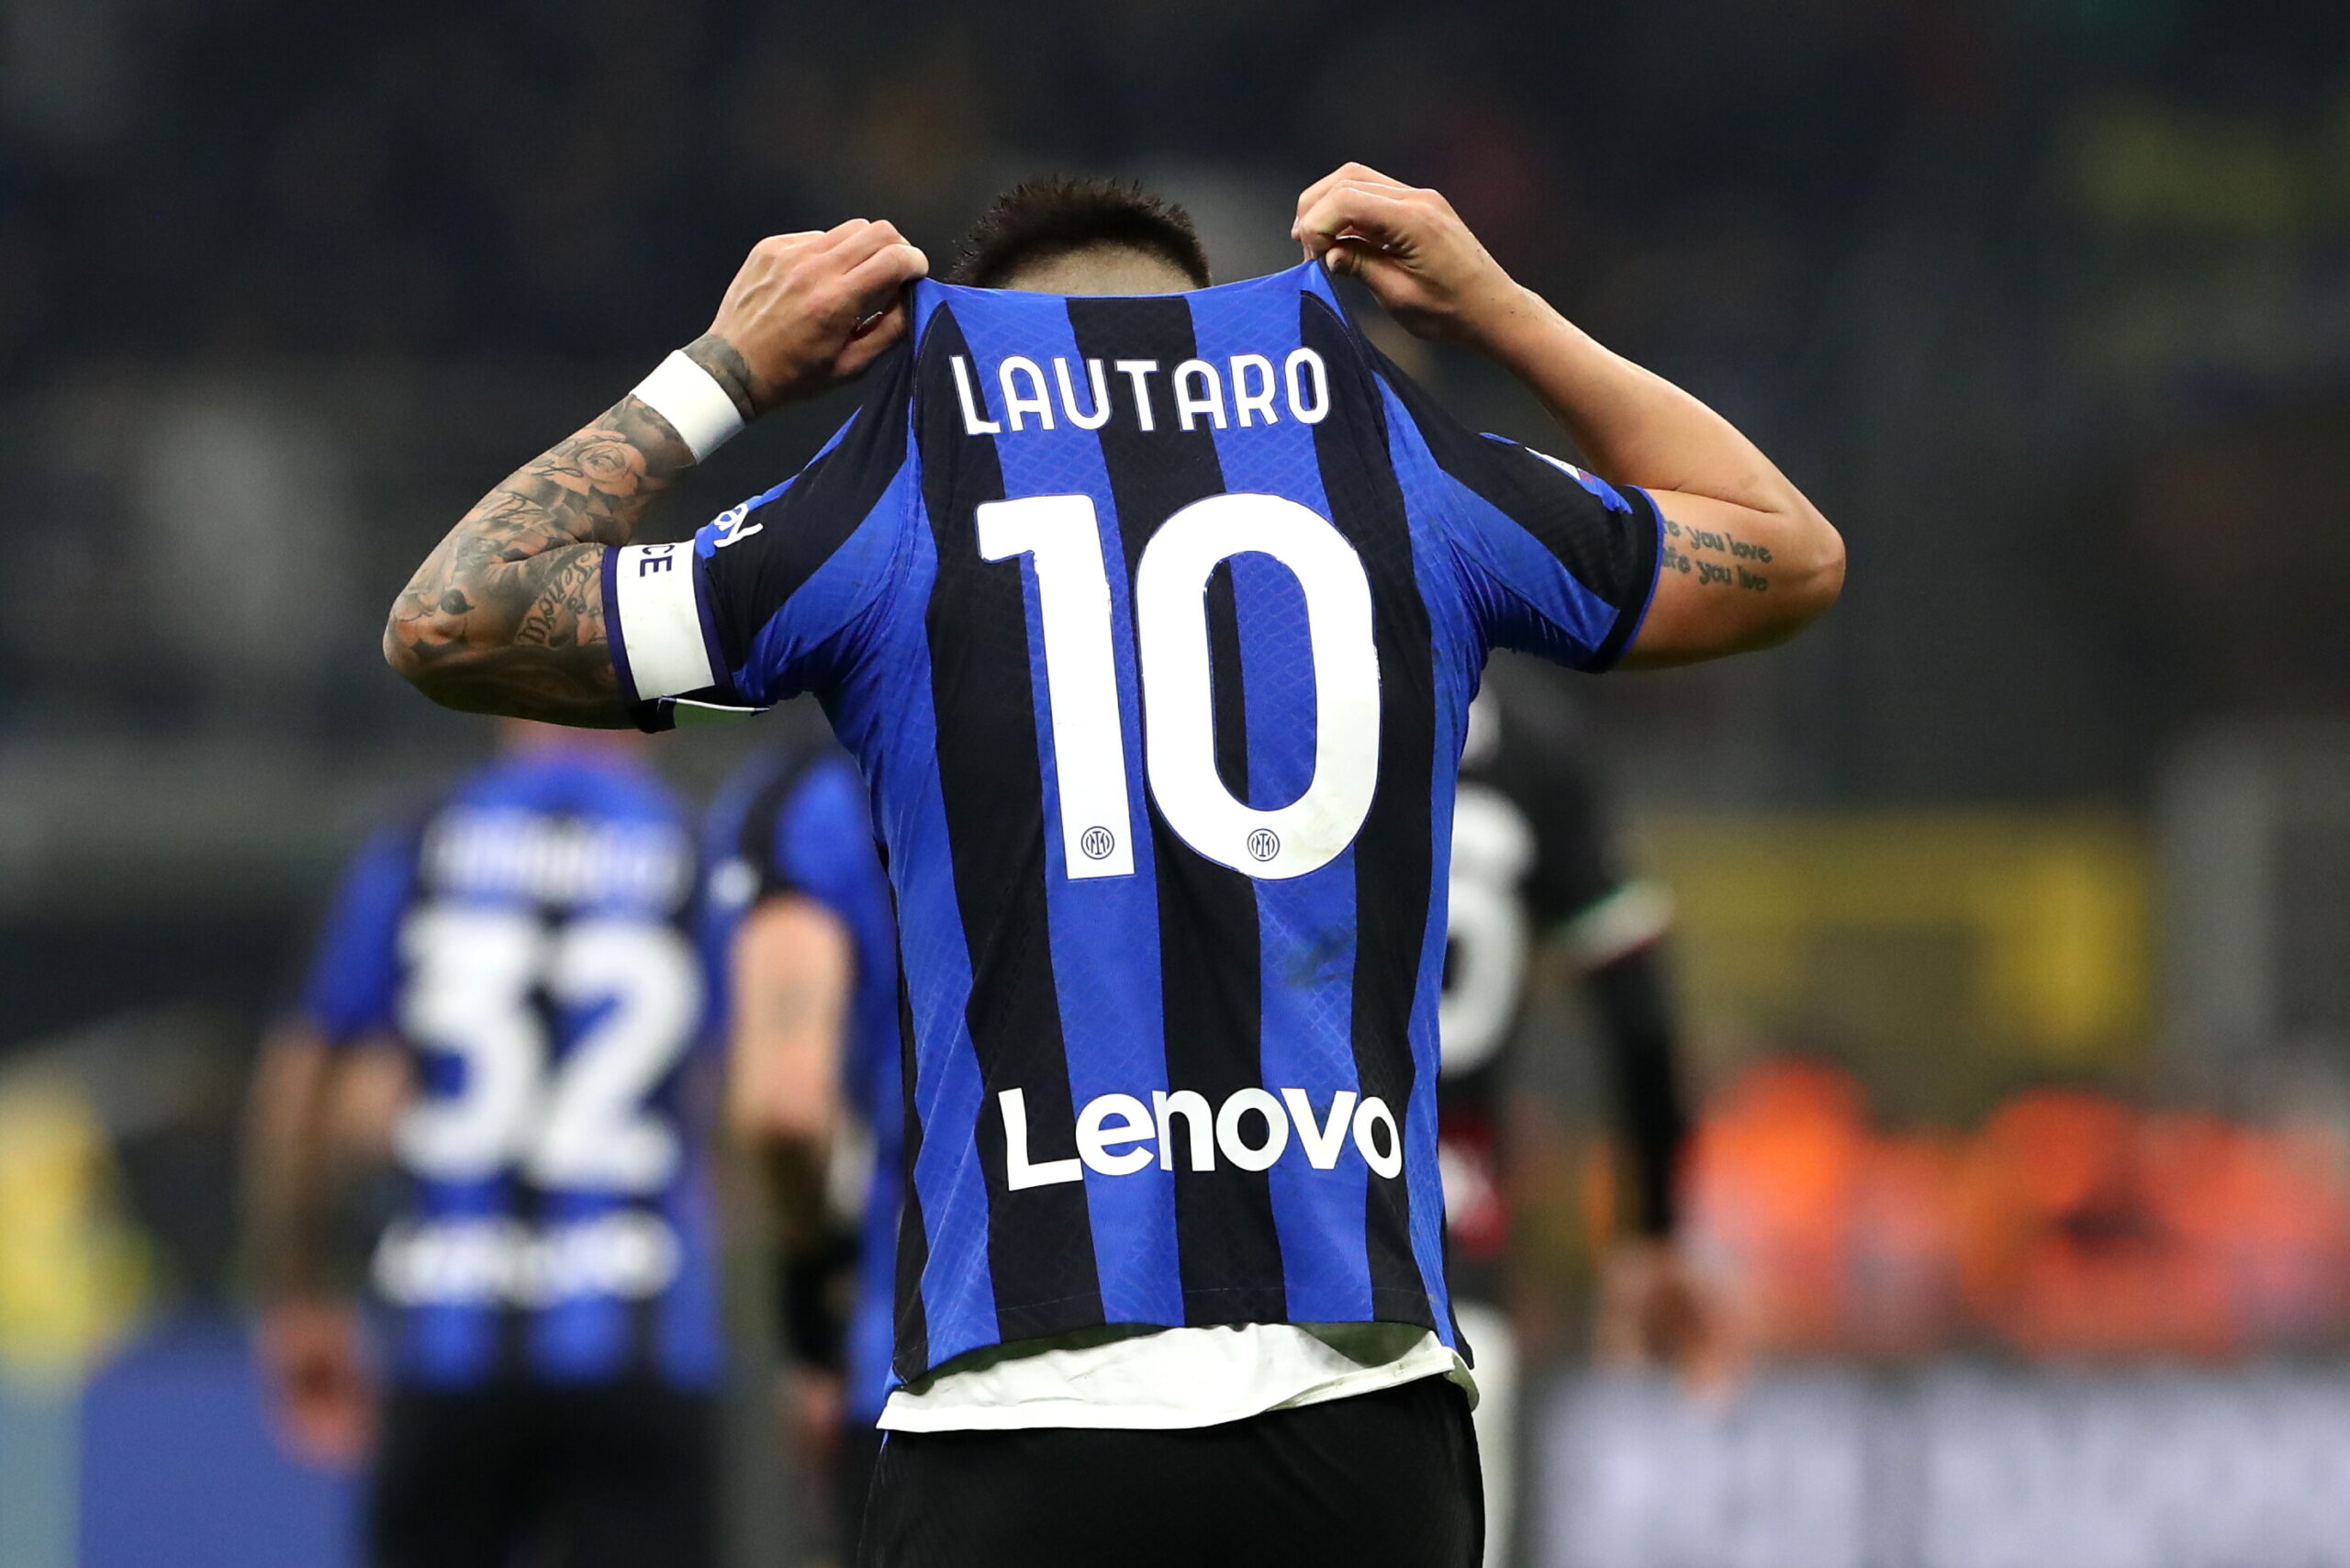 Lautaro depends on Kane, but watch out for Martial